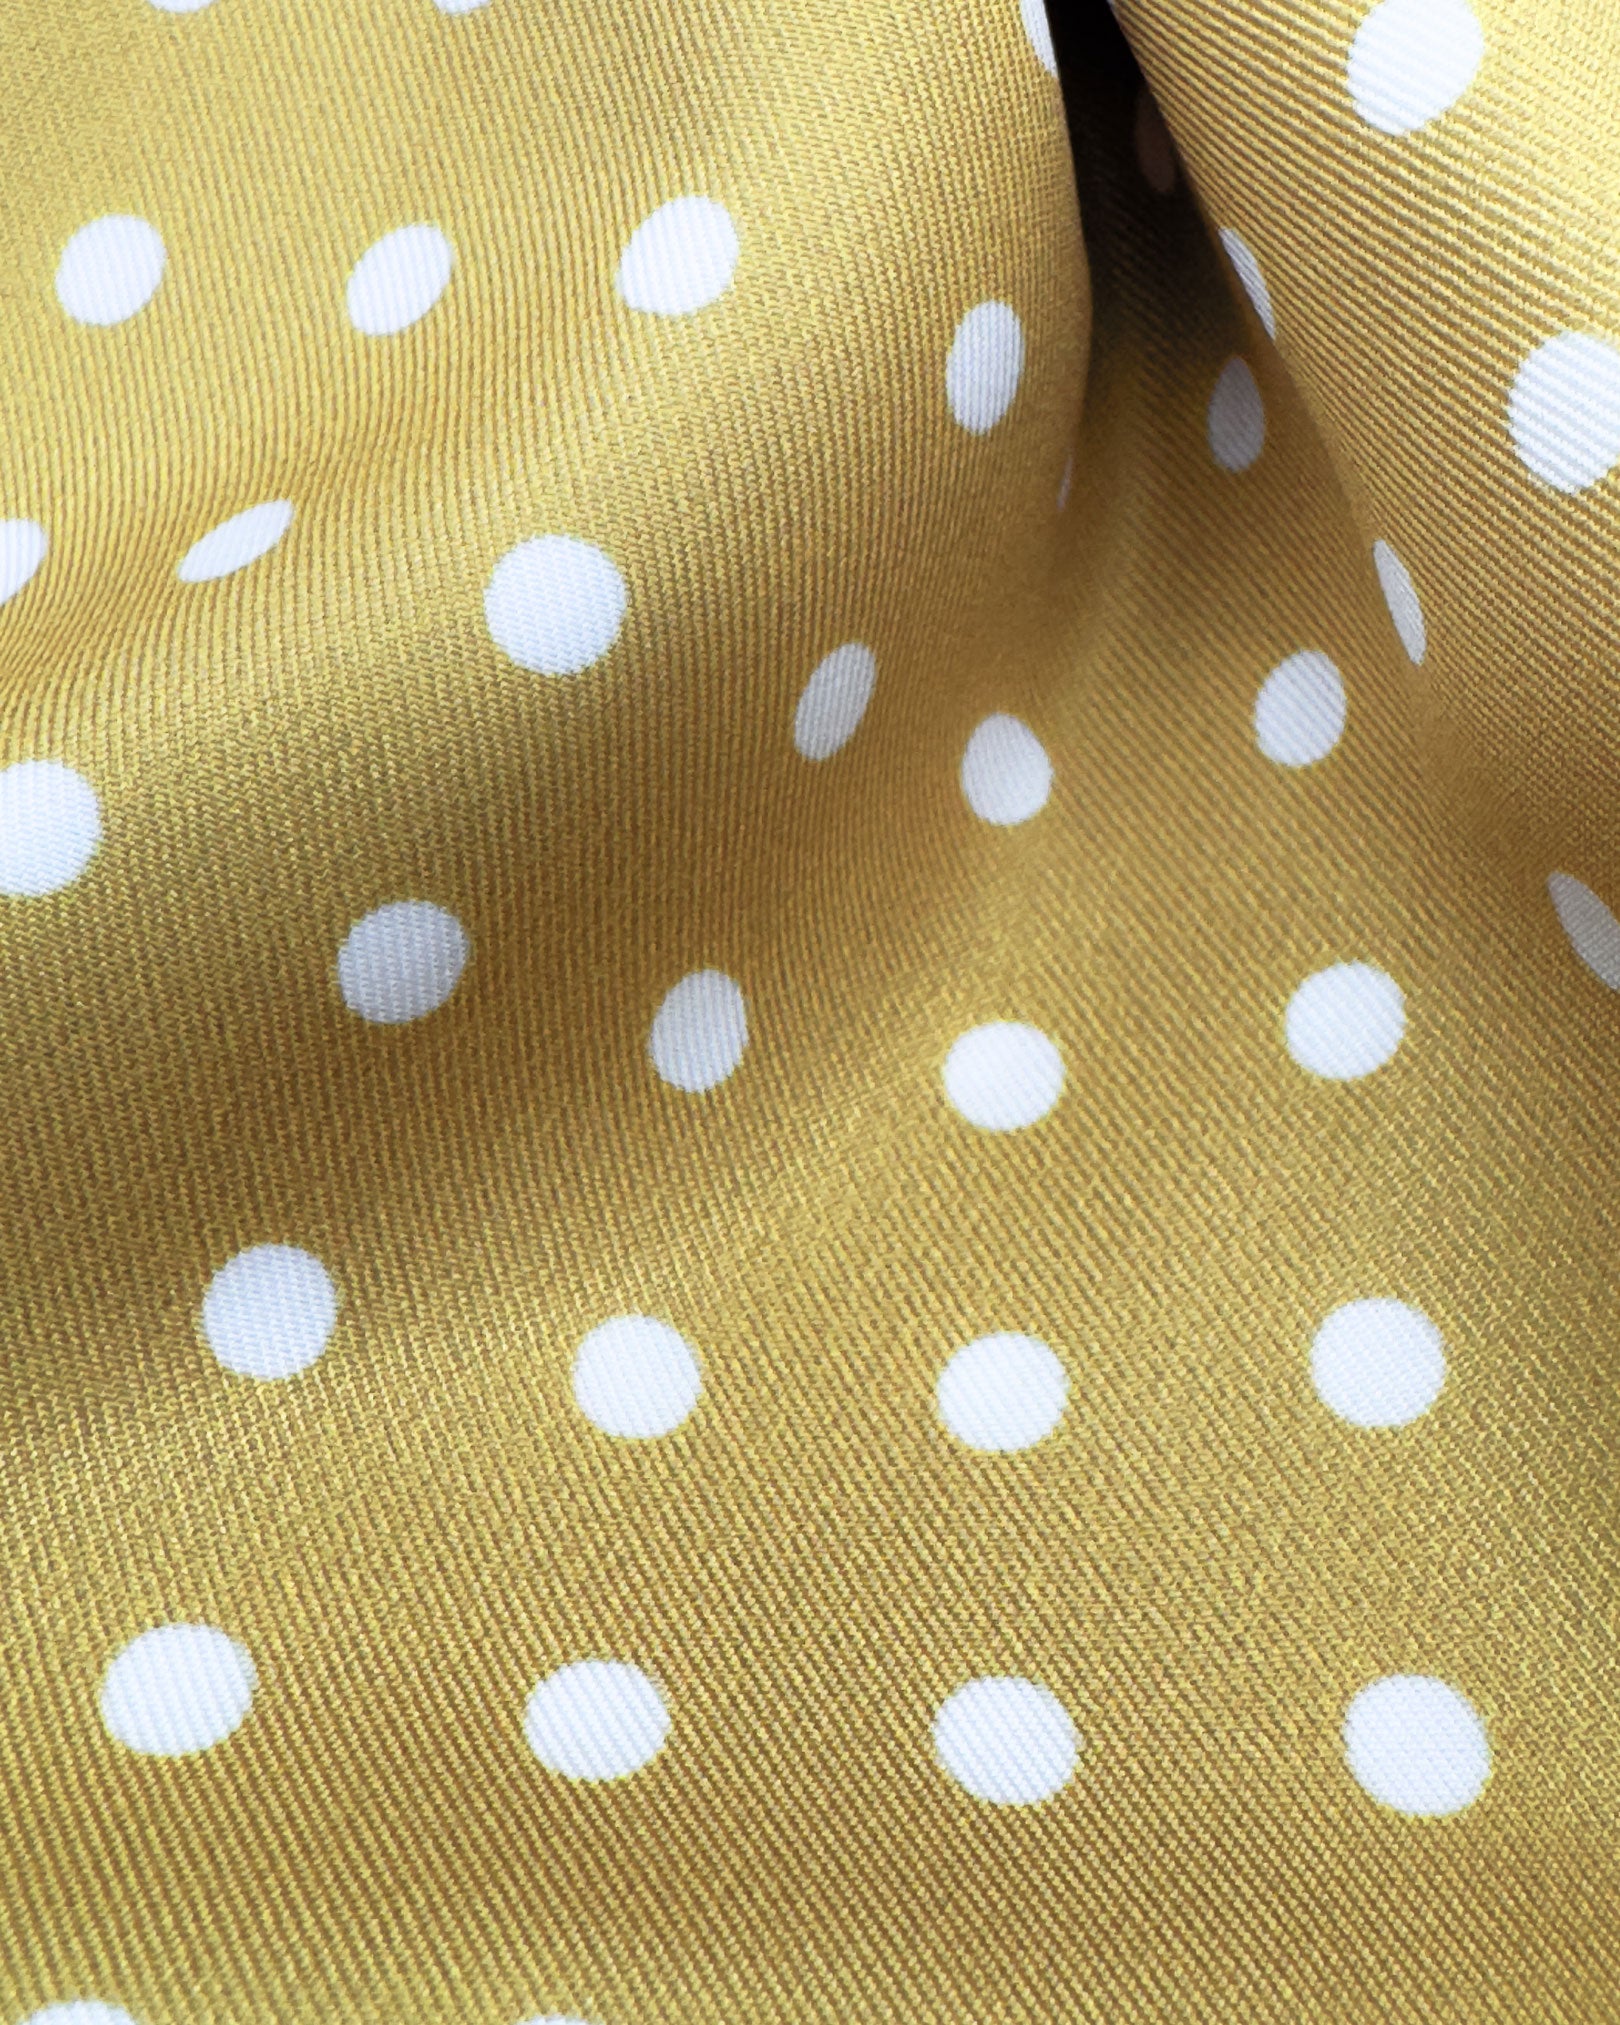 Ruffled close-up view of the 'Denman' polyester scarf, presenting a closer view of the golden yellow fabric with white dots 